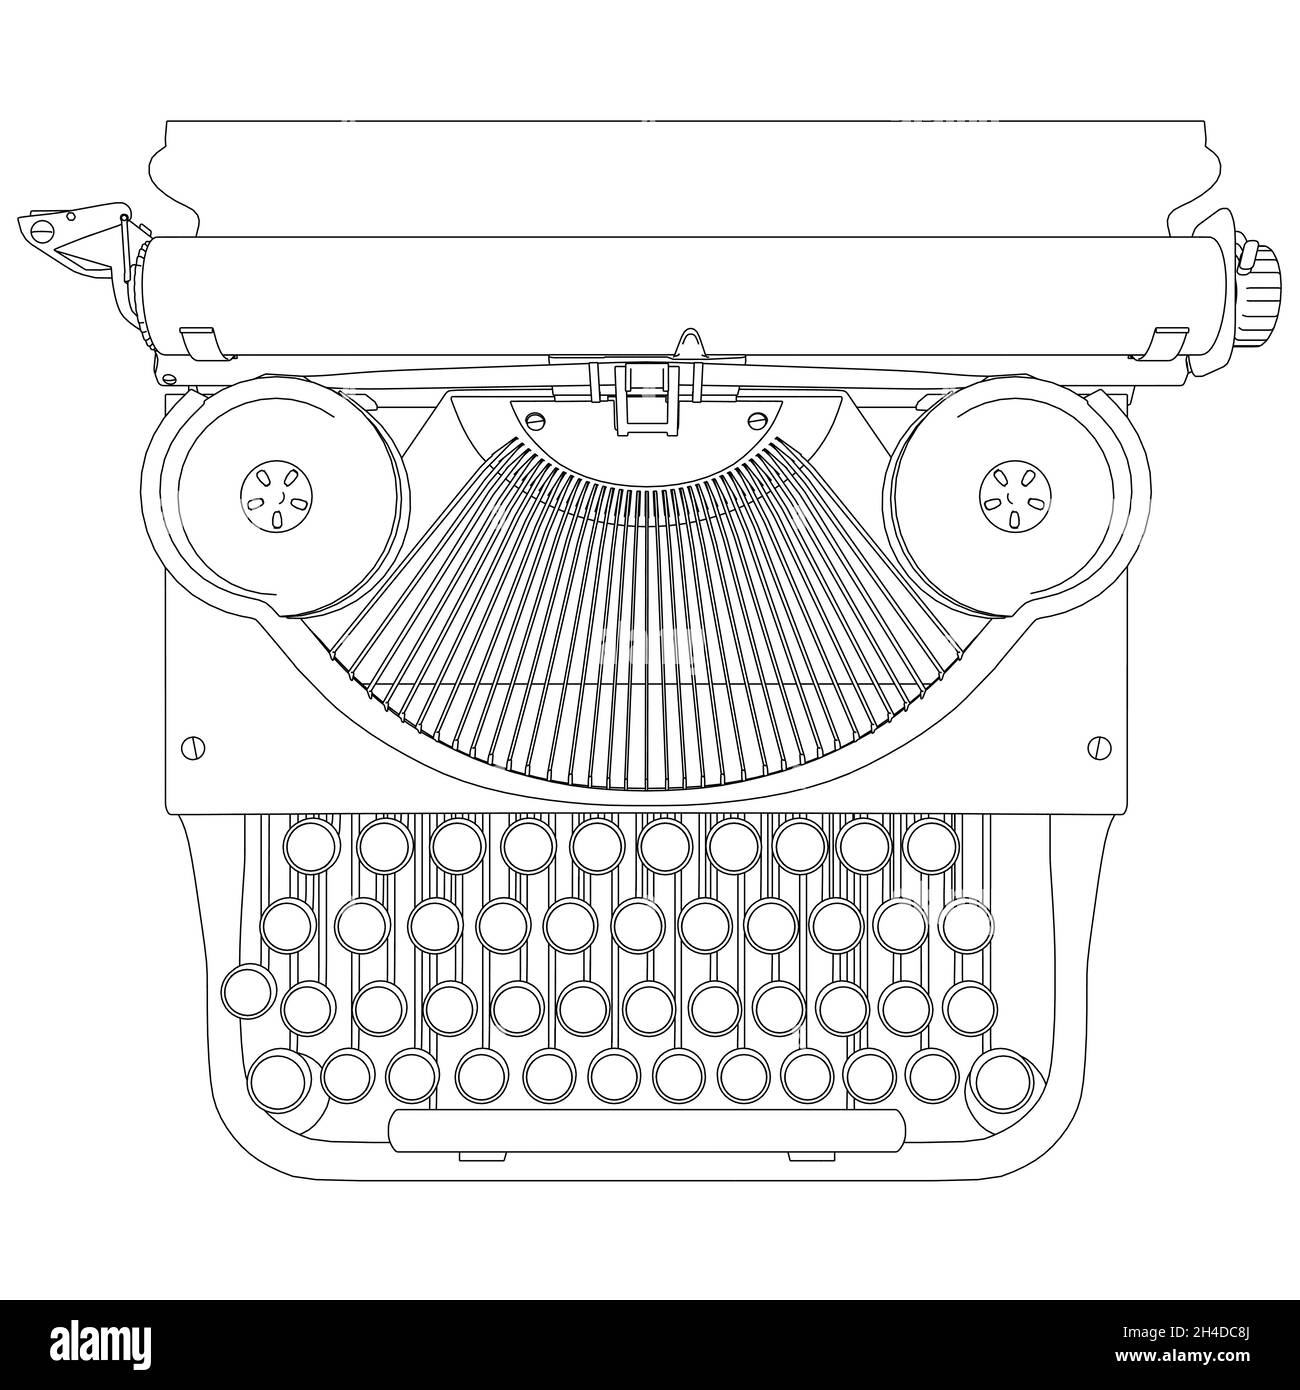 Outline of a vintage typewriter from black lines isolated on white background. View from above. Vector illustration Stock Vector